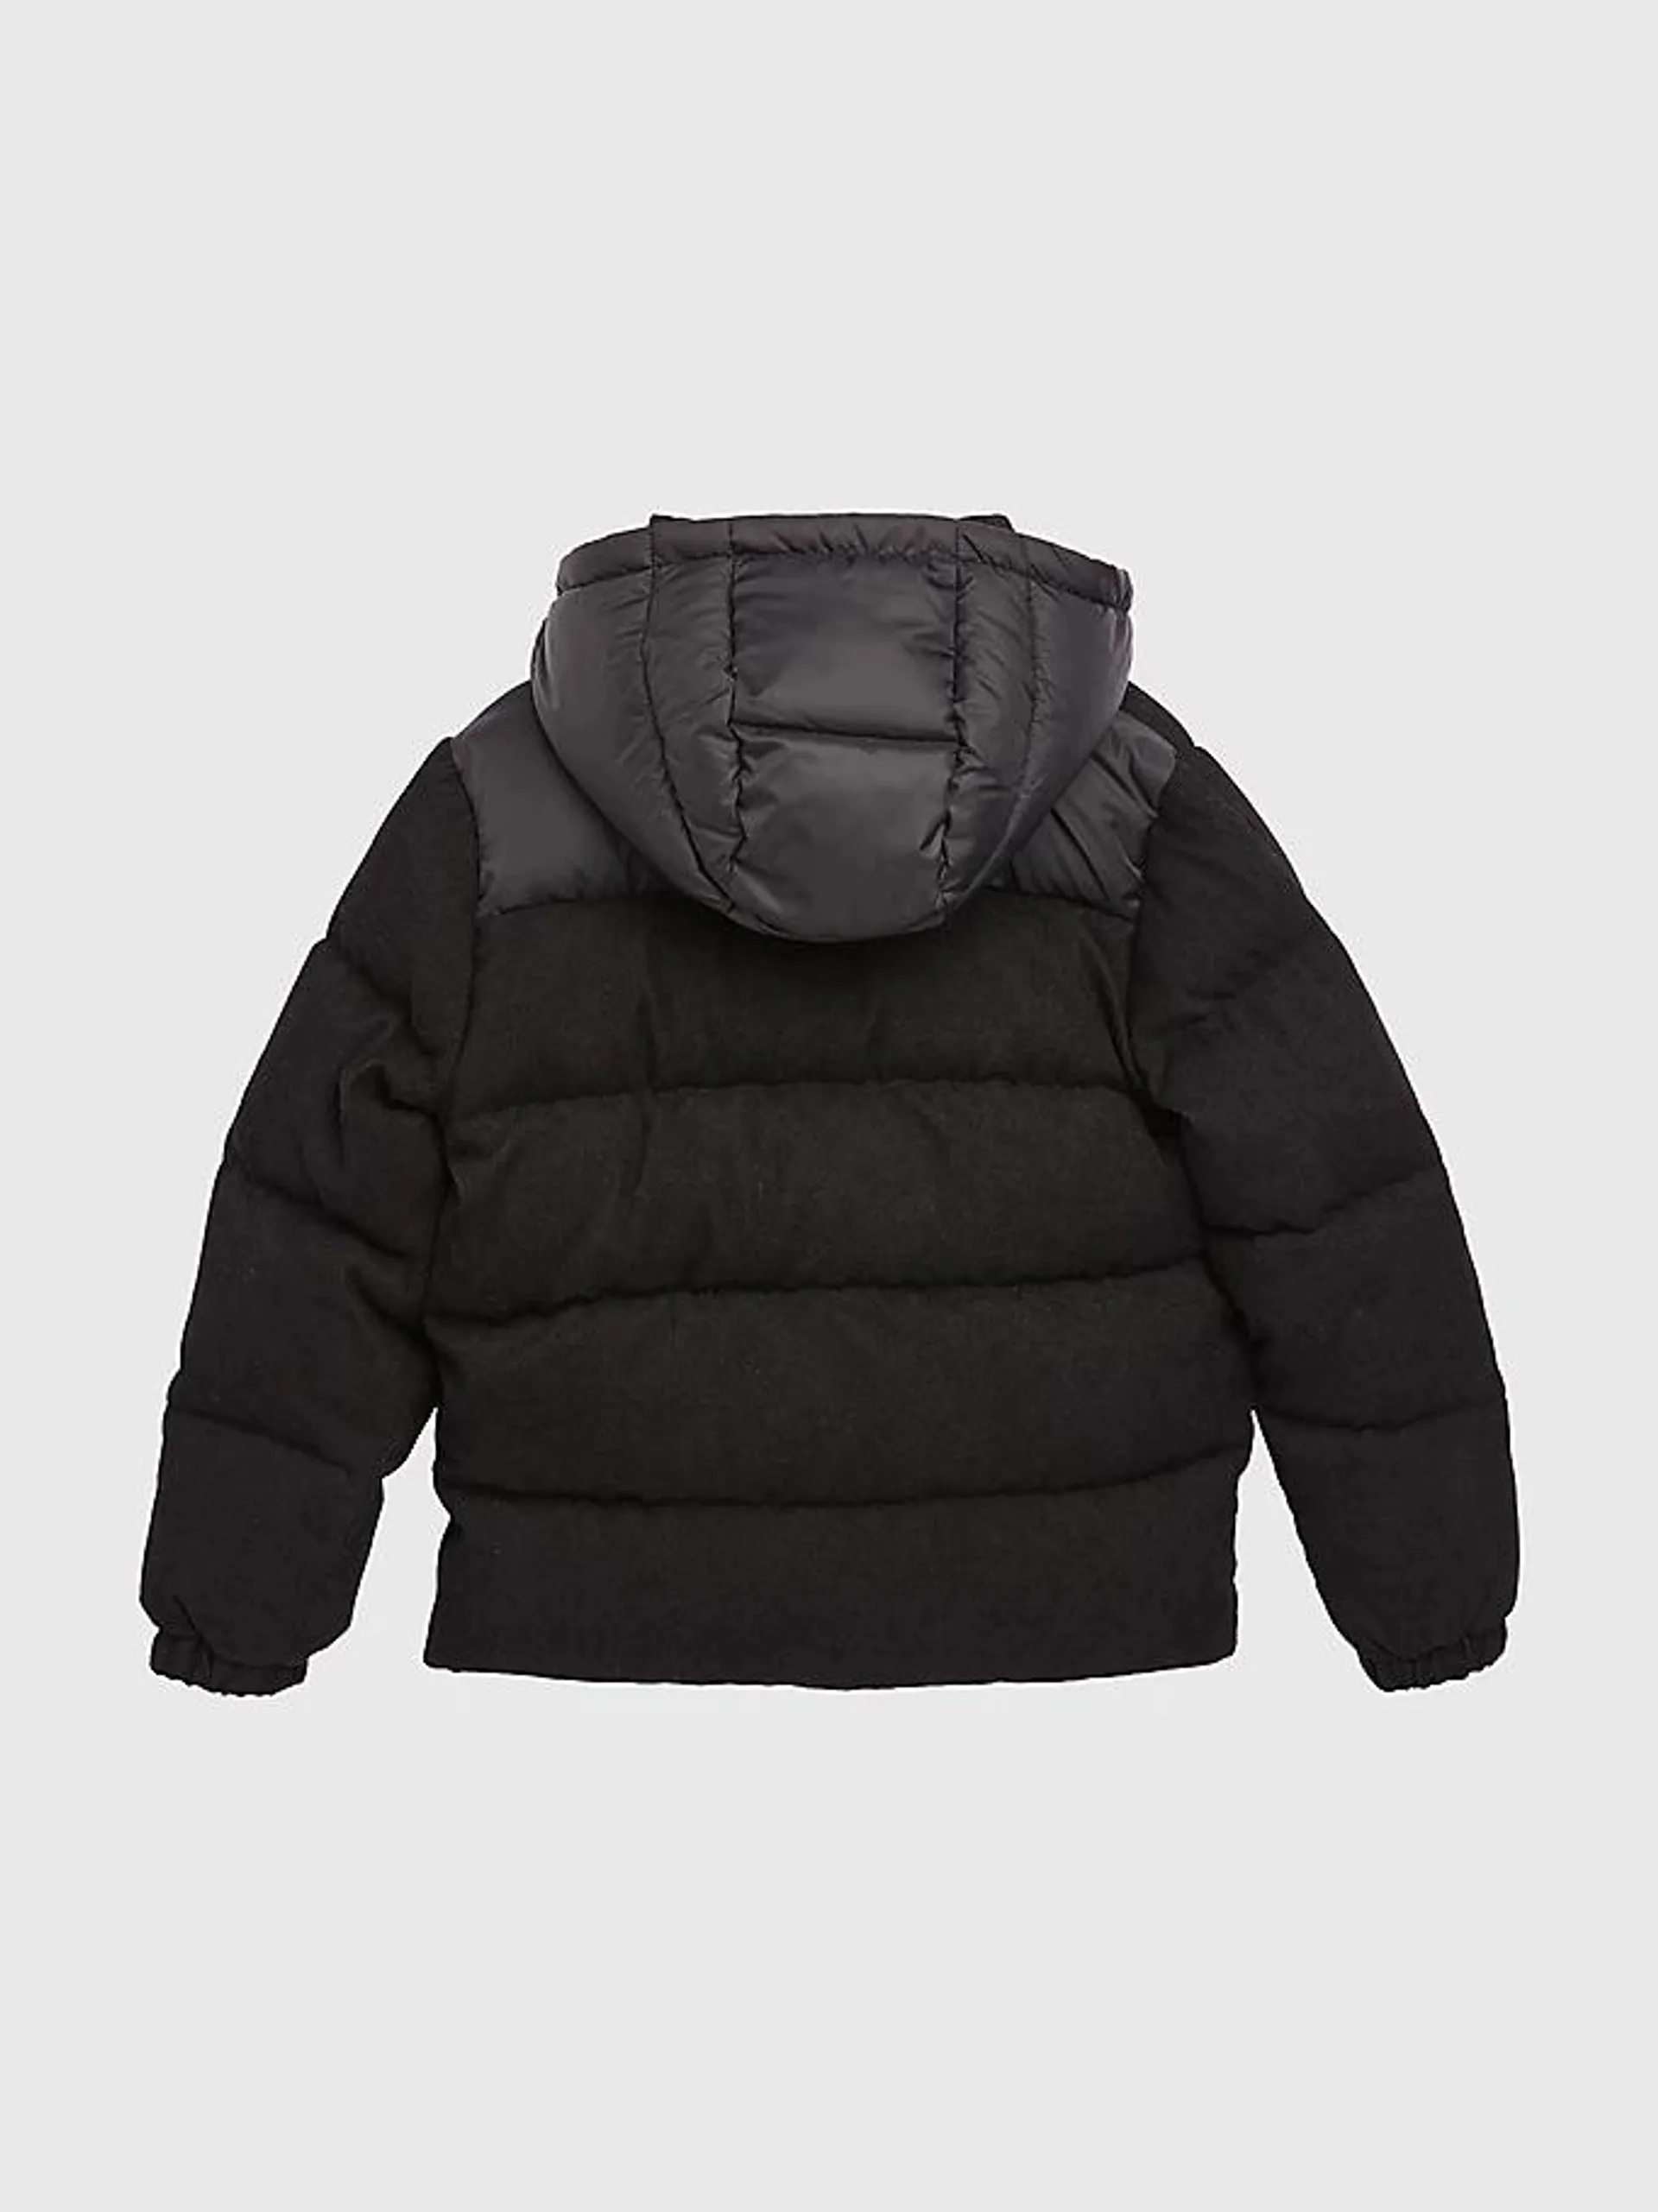 Mixed Texture Cord Puffer Jacket